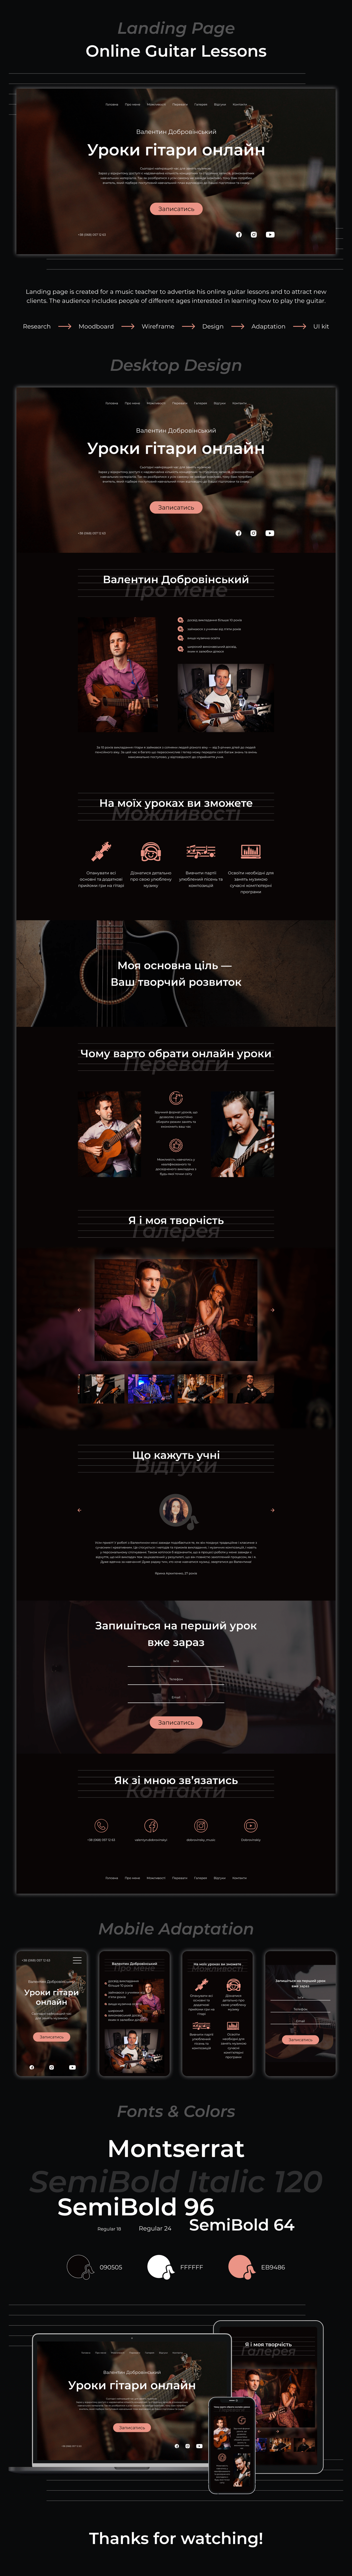 Online Guitar Lessons Landing Page